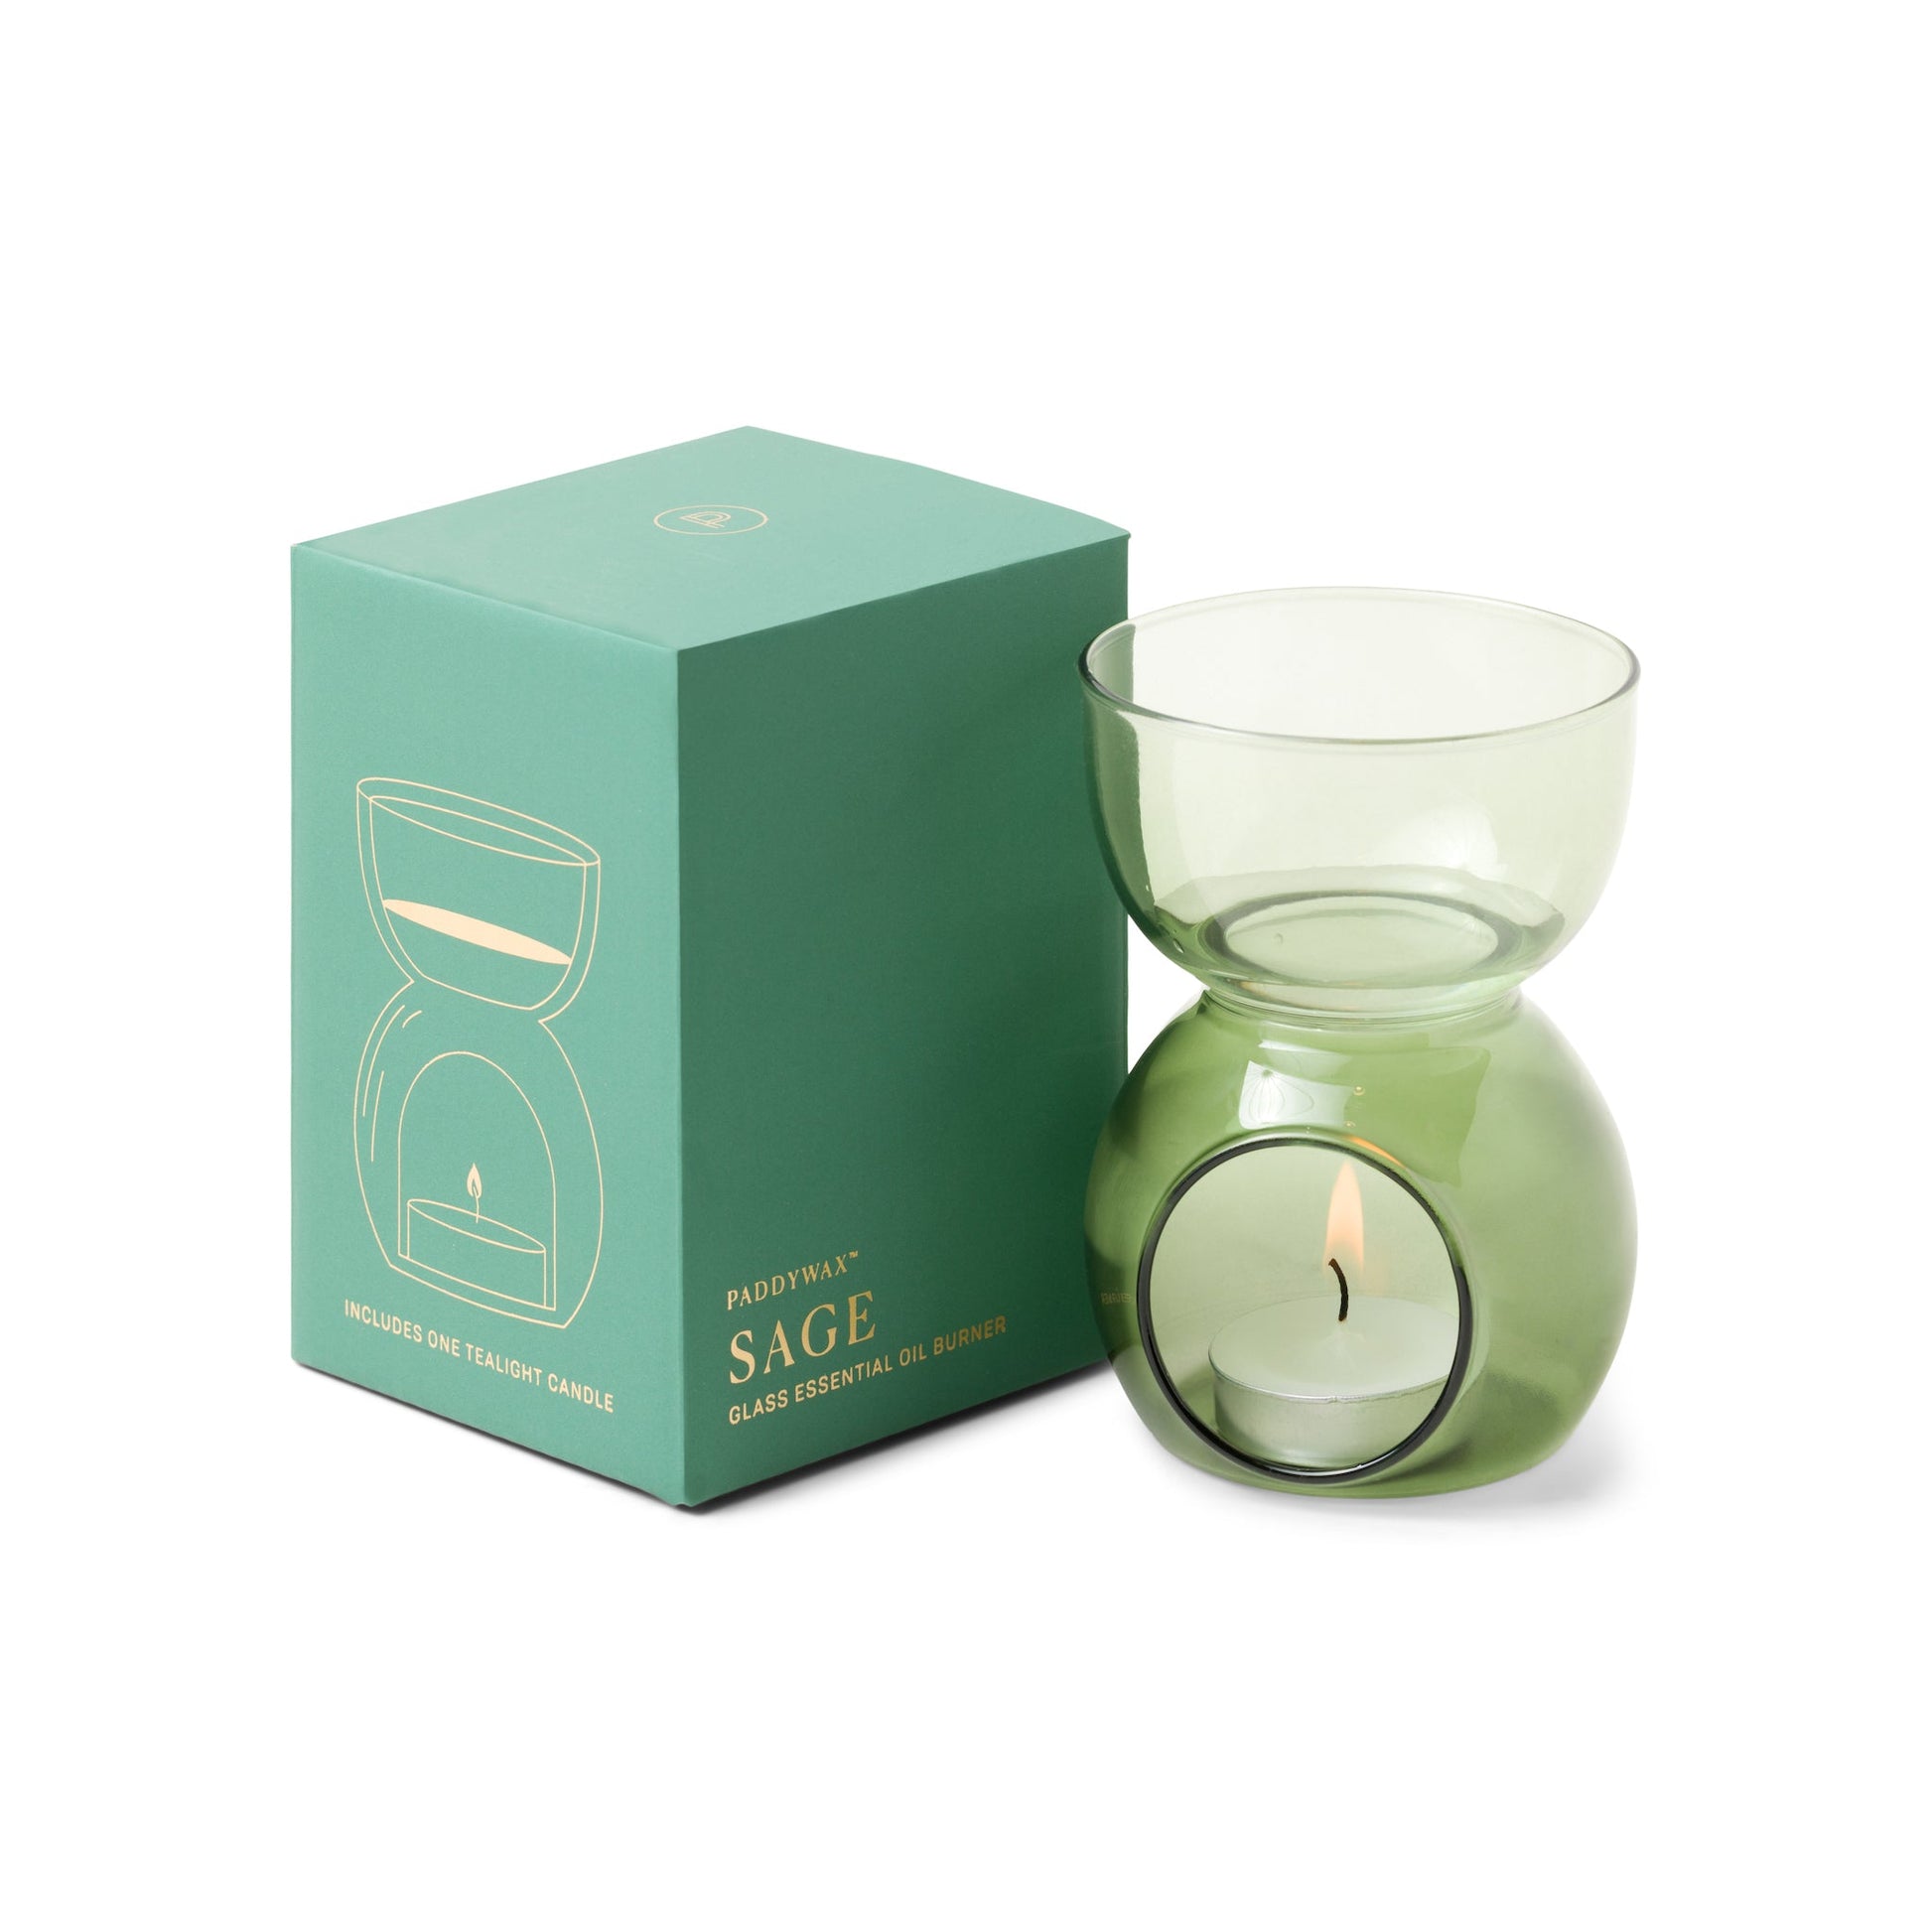 Essential Oil Burner & Tea Light Candle - Sage Green Glass and box side by side